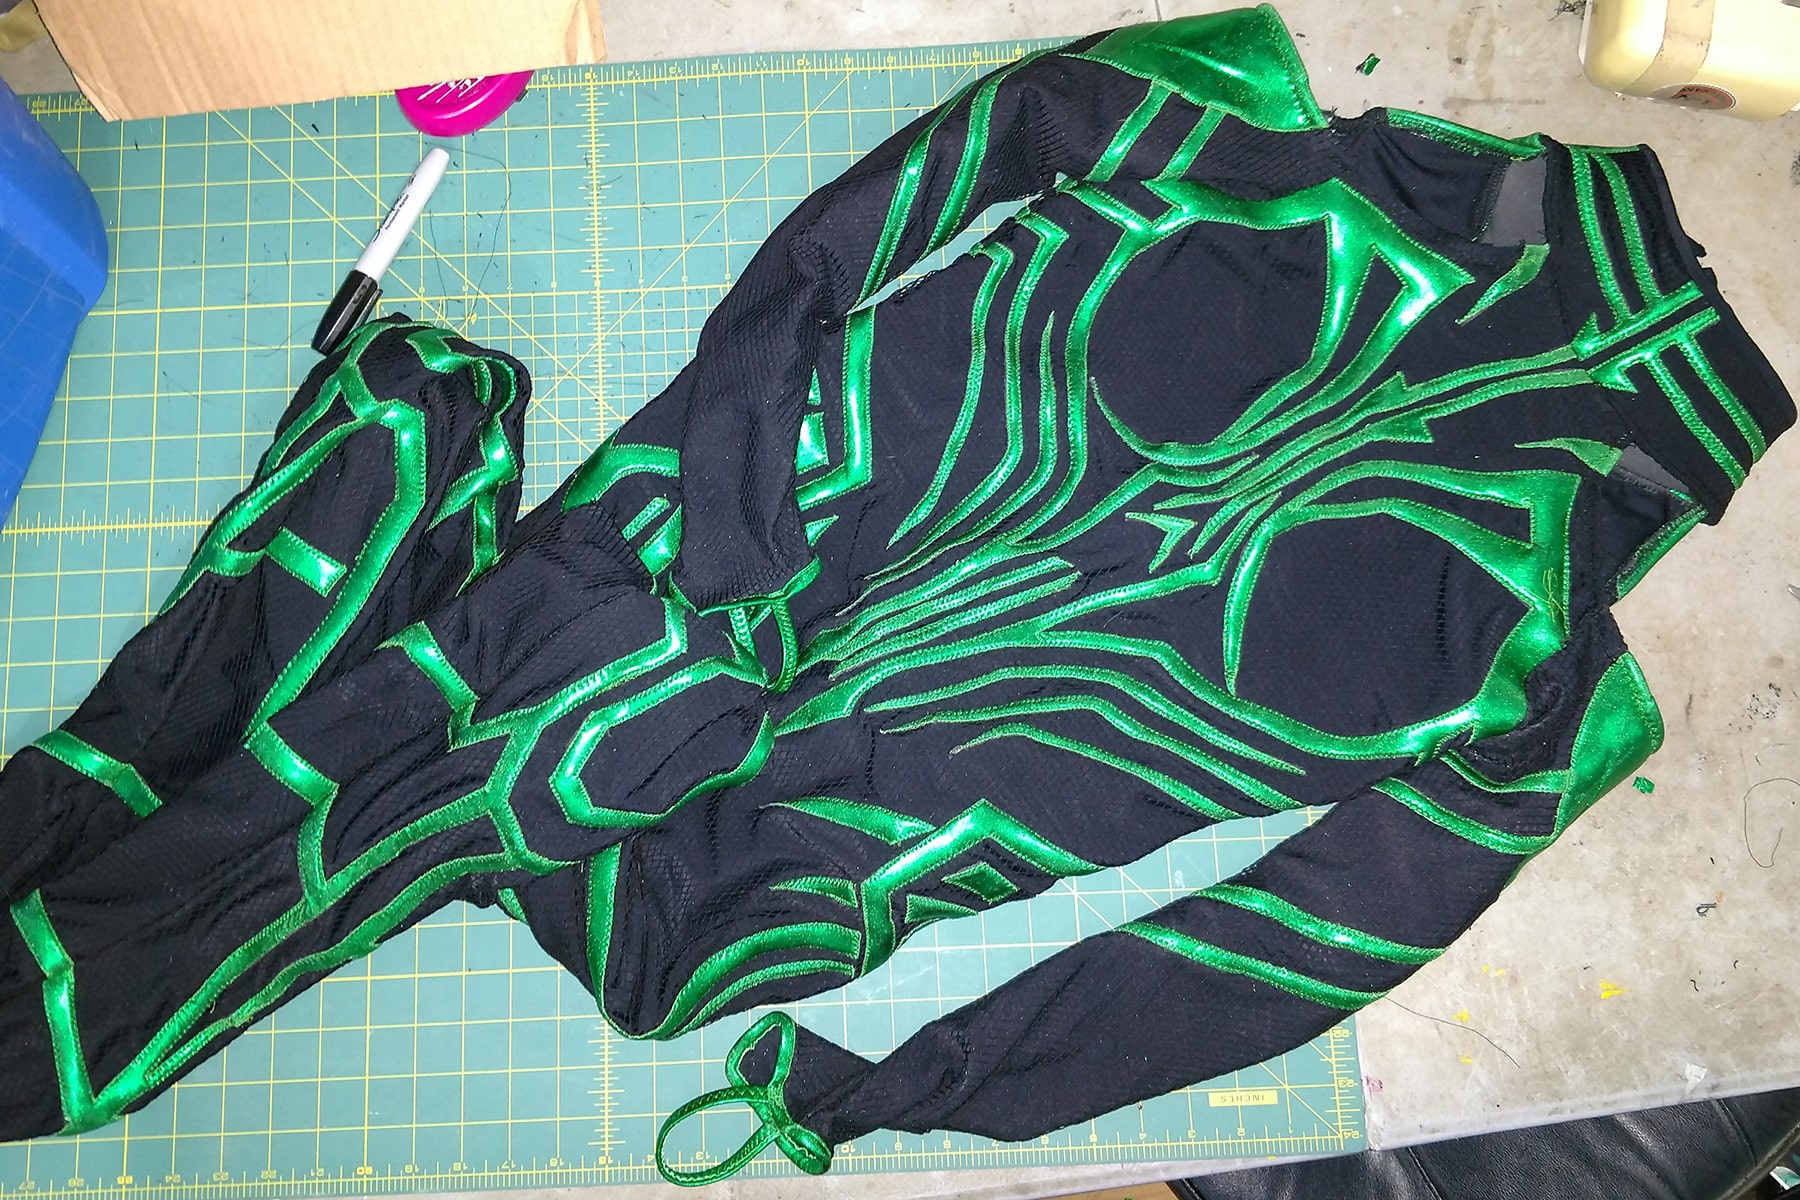 A sewn together Hela costume, laid out on a green work surface.